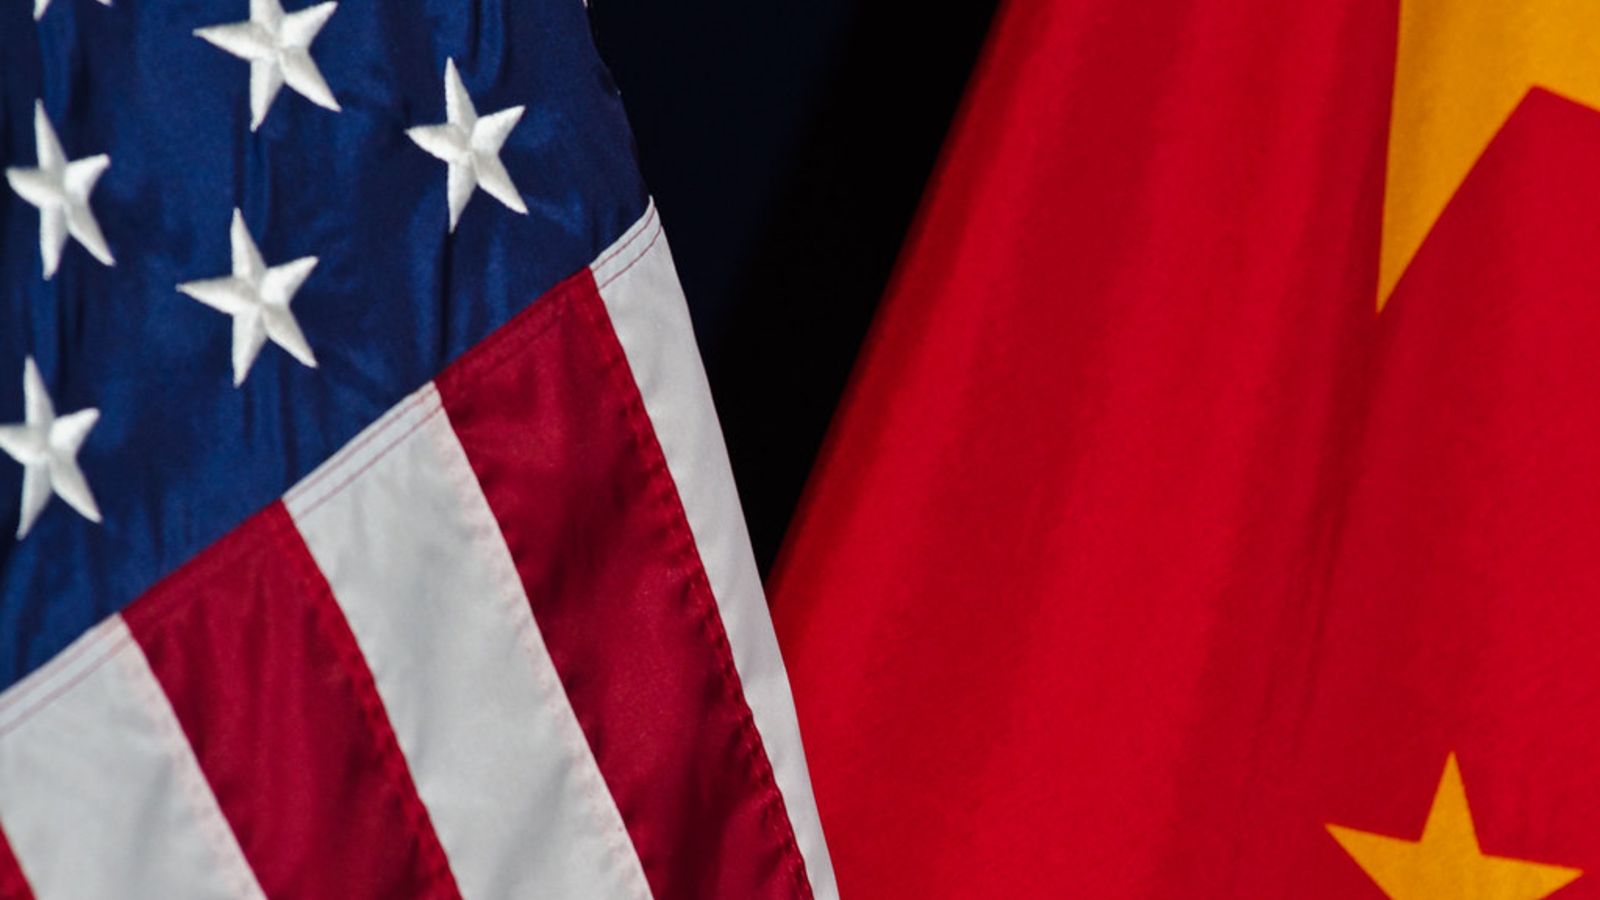 USA and China Flag side by side